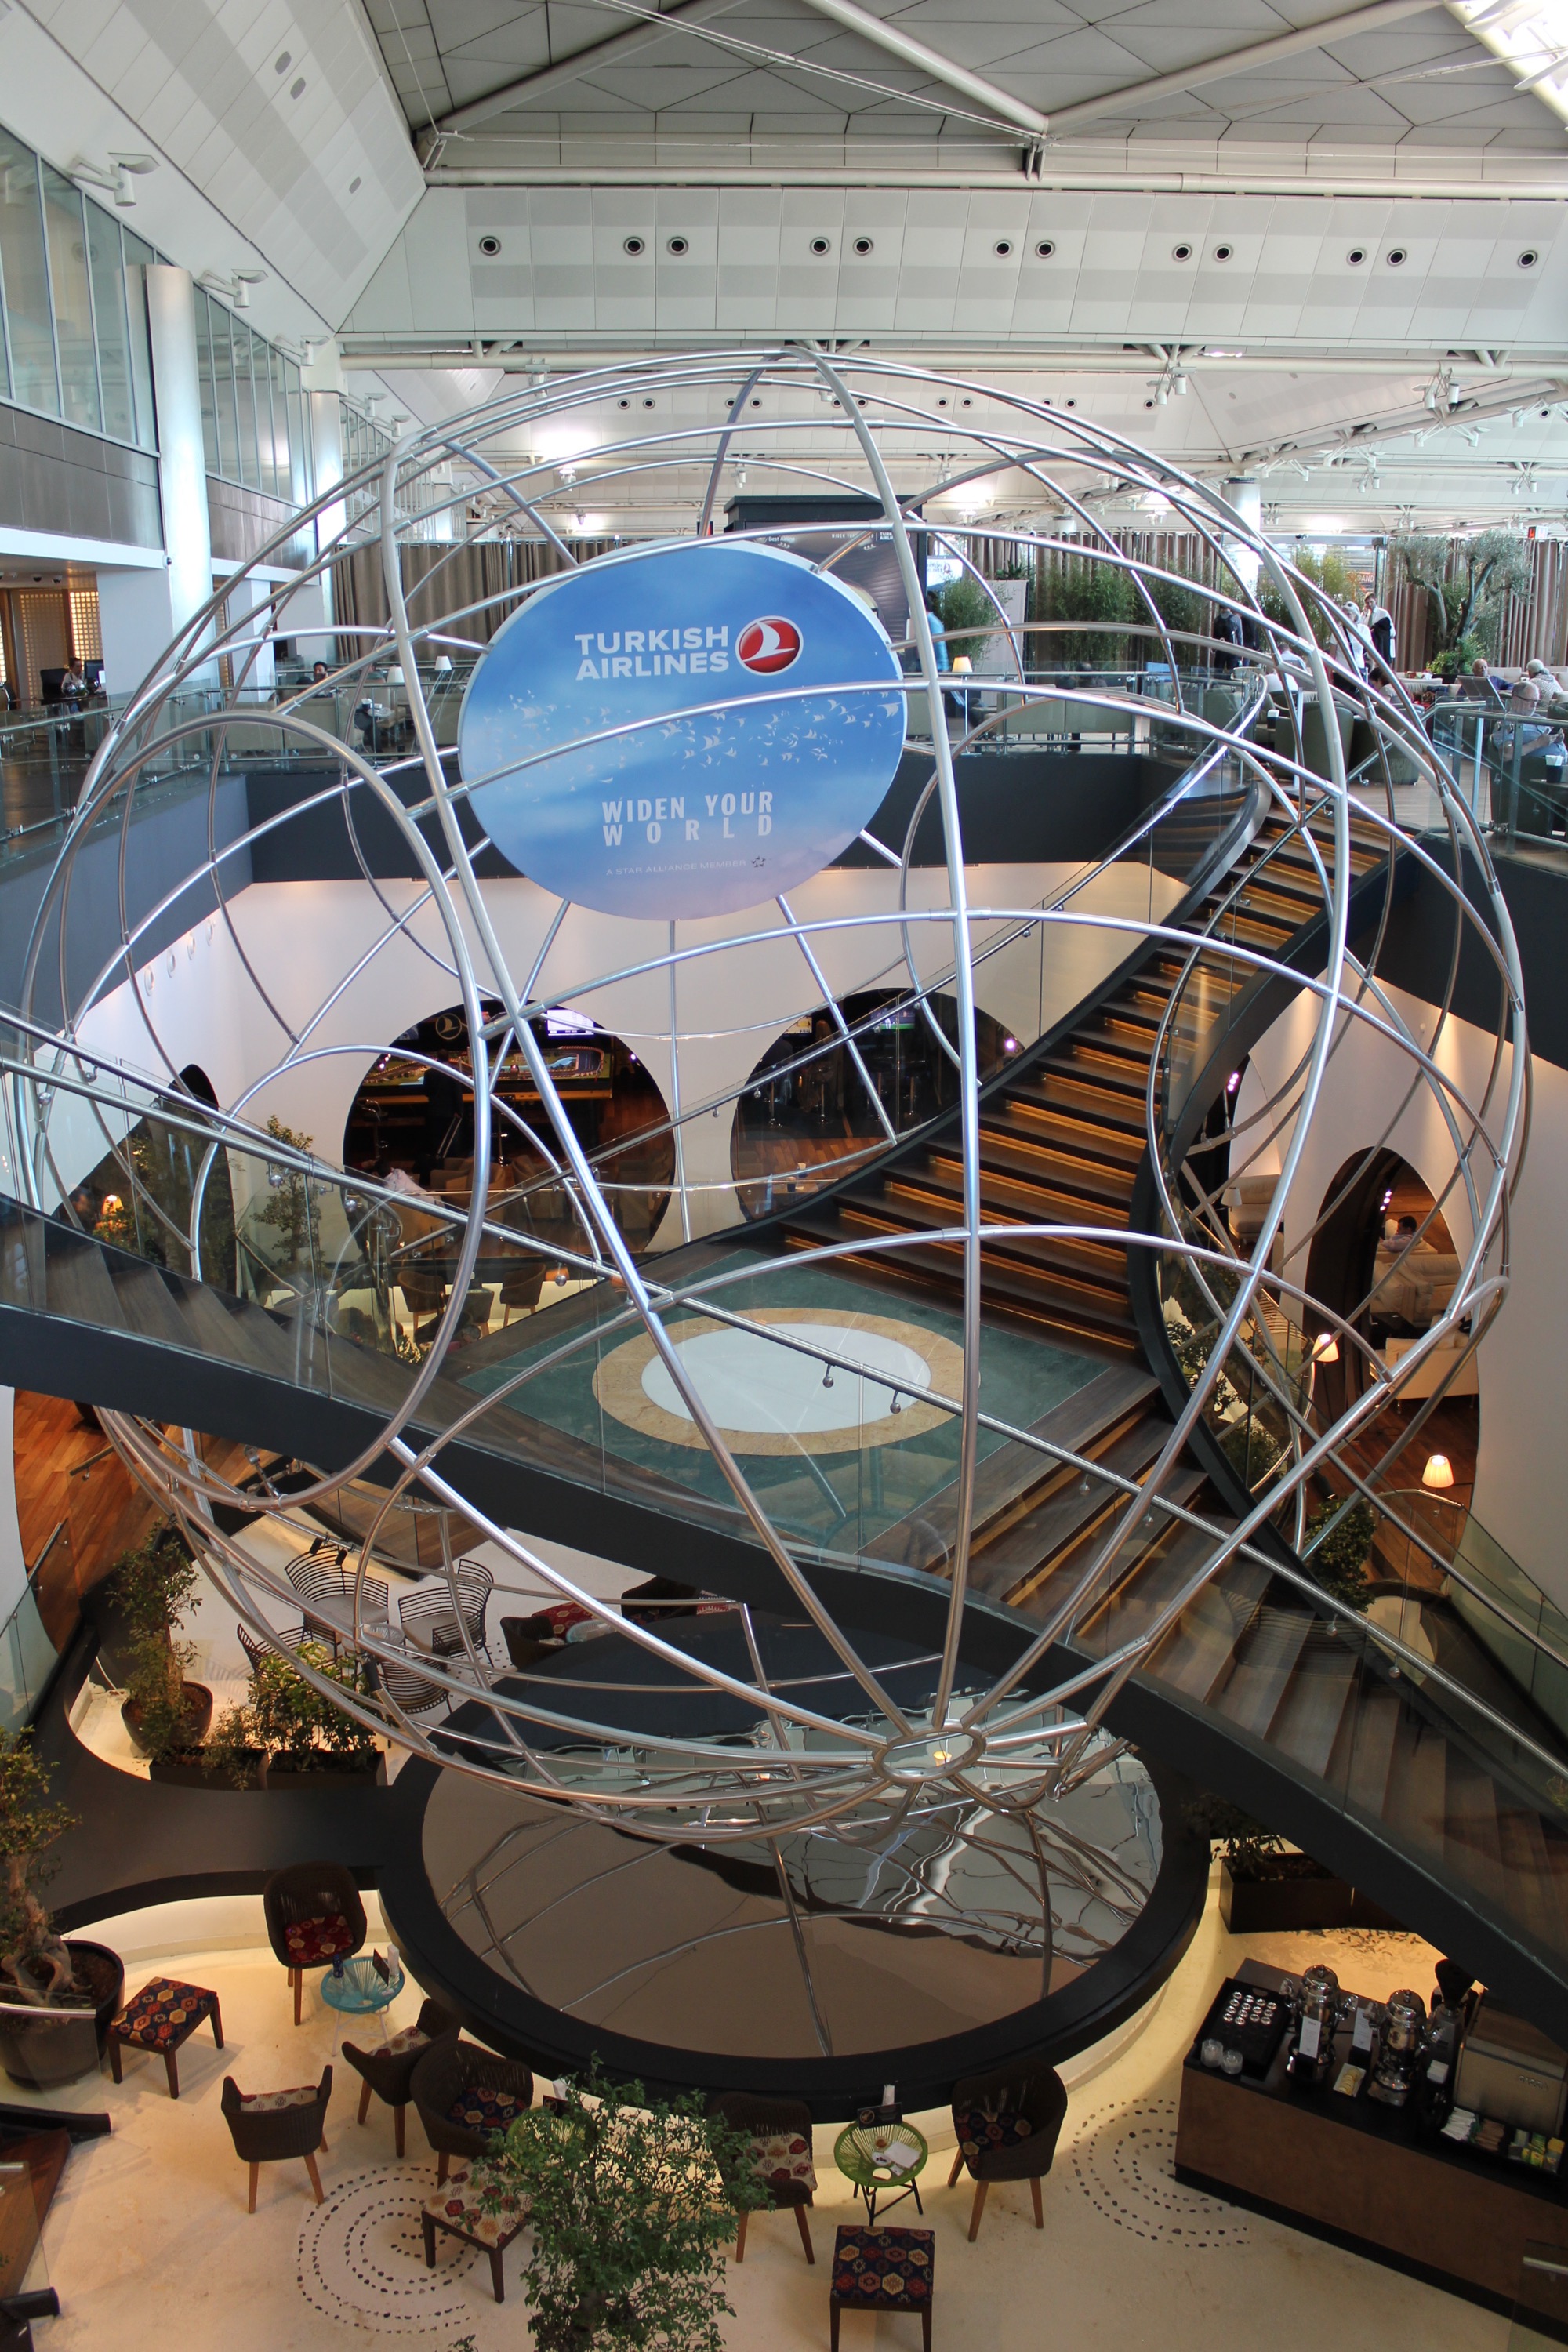 turkish-airlines-istanbul-lounge-36